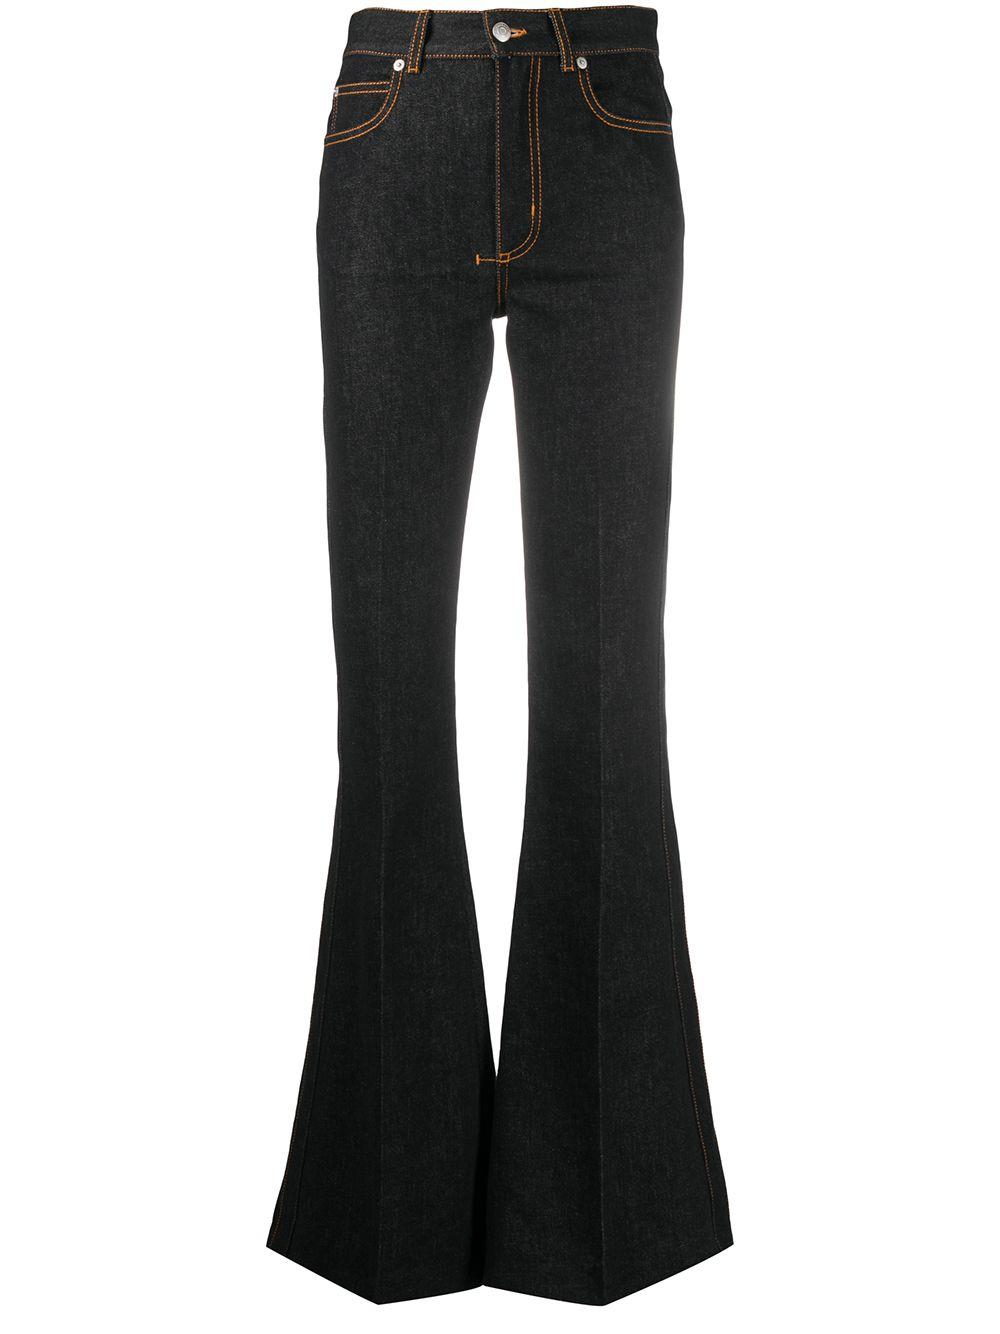 Alexander McQueen Synthetic High-waisted Flared Jeans in Black - Lyst